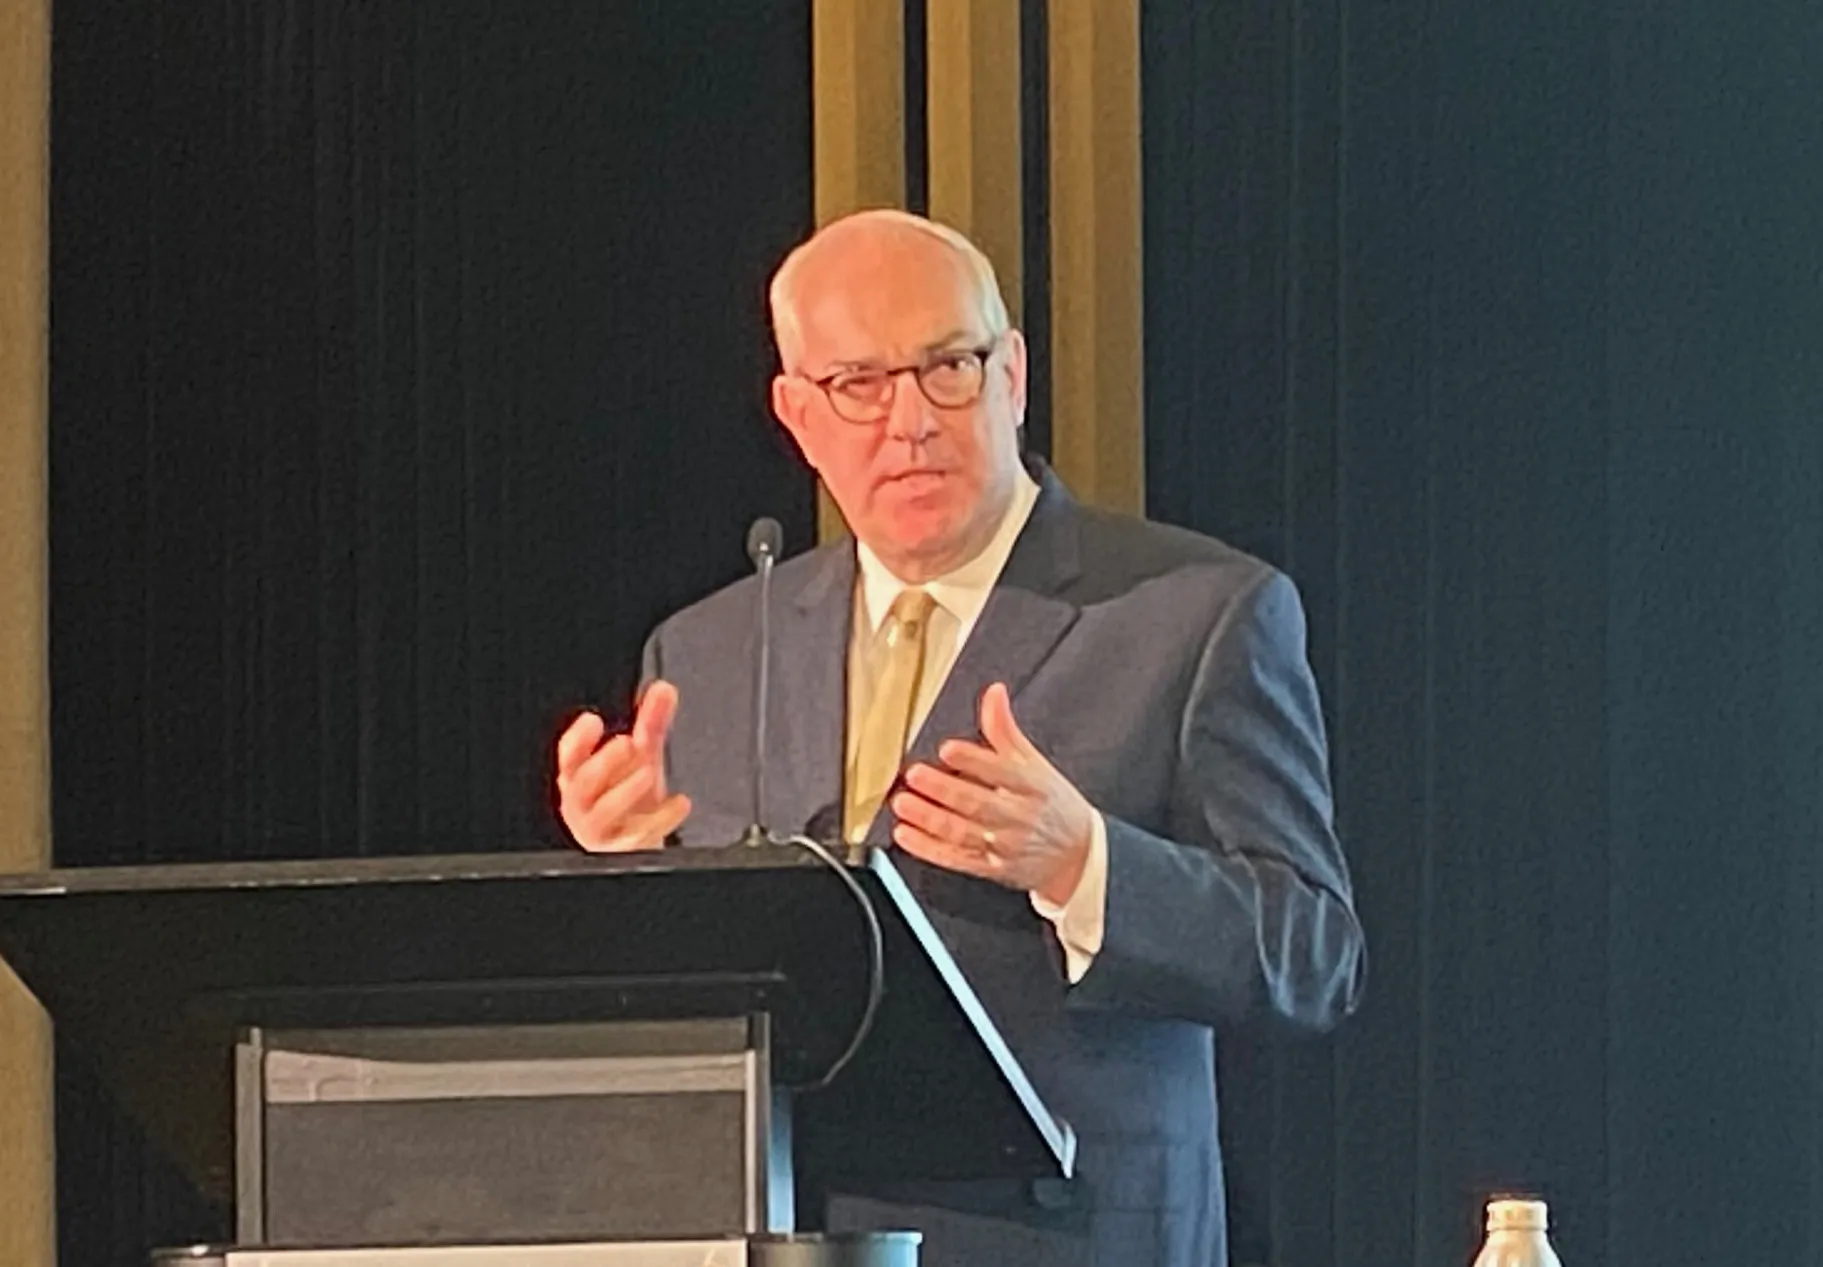 EWTN CEO Michael P. Warsaw delivers the keynote address at conclusion of “Journalism in a Post-Truth World,” a conference held March 10-11, 2023, at the Museum of the Bible in Washington, D.C., co-sponsored by EWTN News and Franciscan University of Steubenville.?w=200&h=150